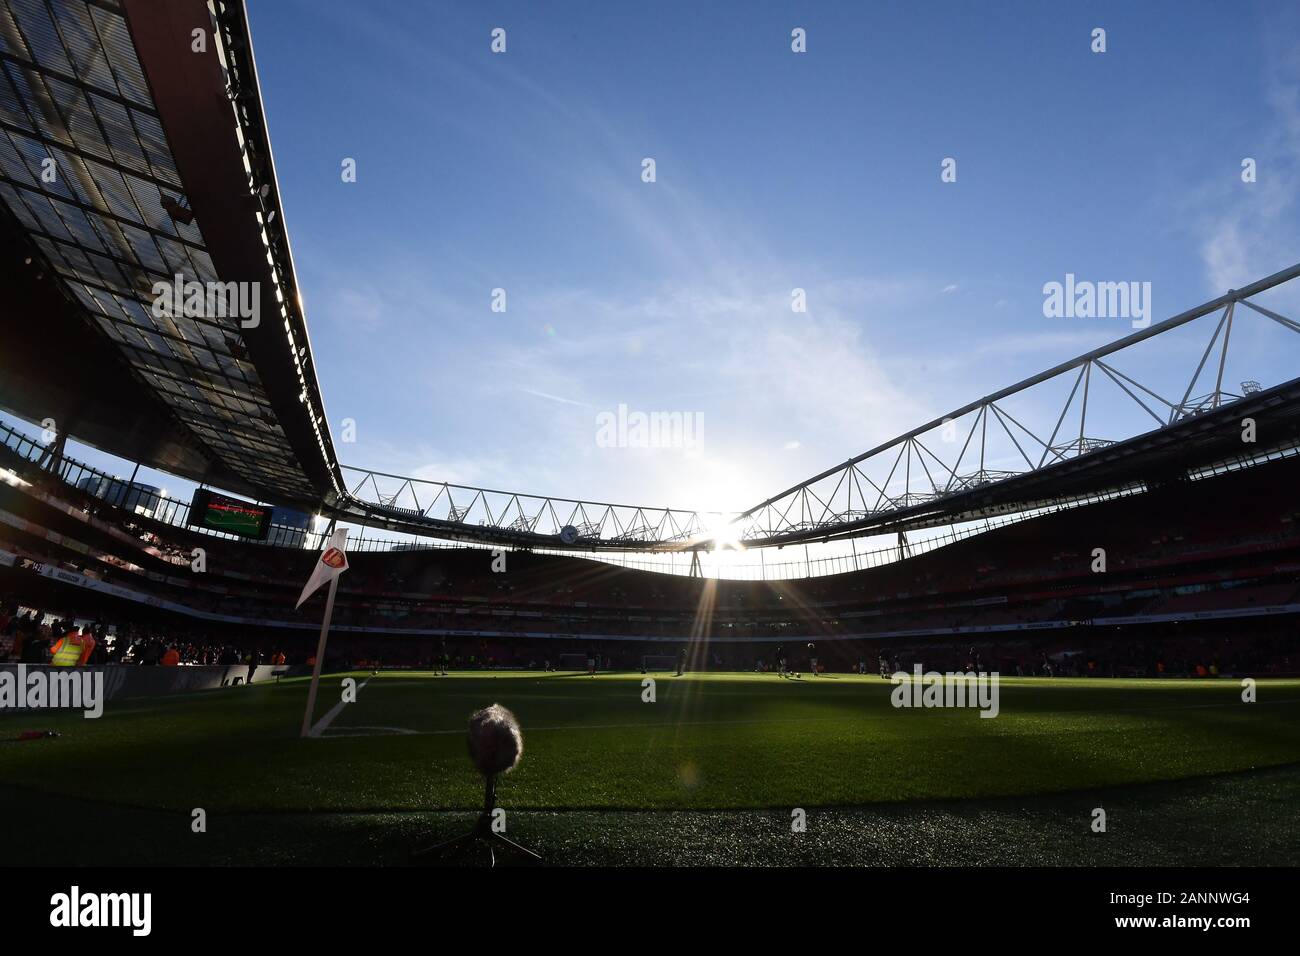 LONDON, ENGLAND - JANUARY 18TH General view of the stadium during the Premier League match between Arsenal and Sheffield United at the Emirates Stadium, London on Saturday 18th January 2020. (Credit: Ivan Yordanov | MI News)Photograph may only be used for newspaper and/or magazine editorial purposes, license required for commercial use Credit: MI News & Sport /Alamy Live News Stock Photo